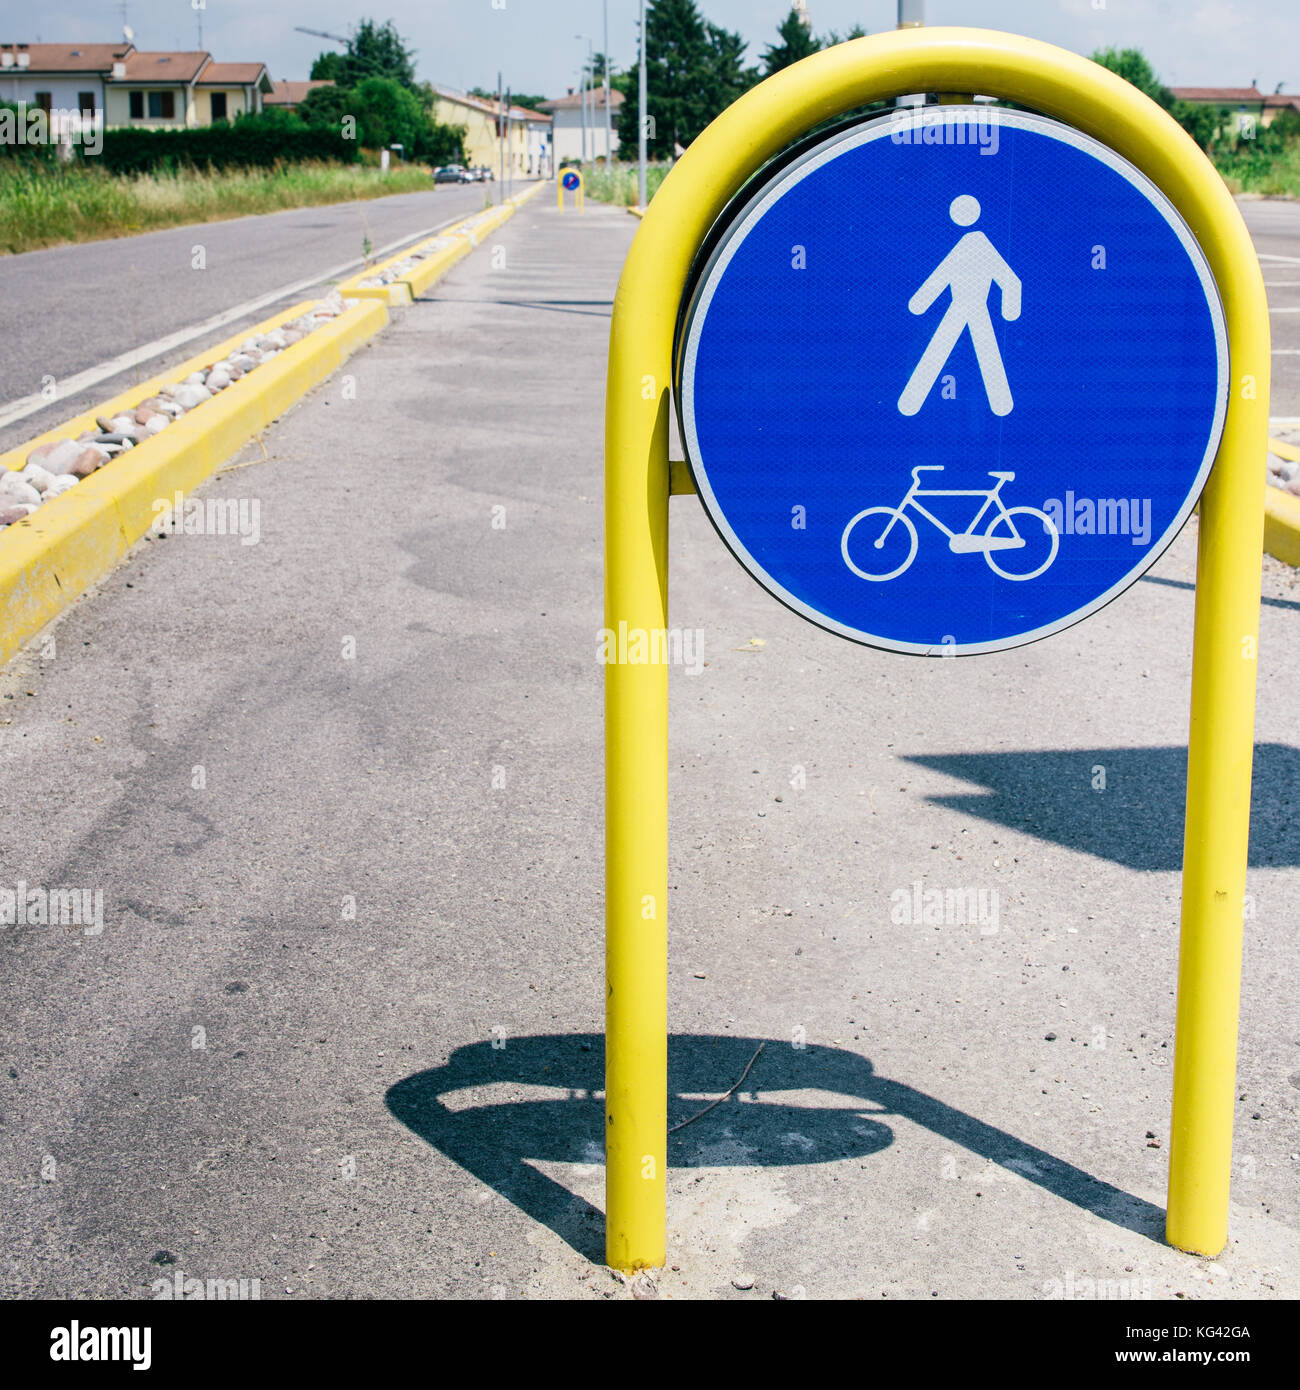 Cycling and pedestrian lane sign Stock Photo